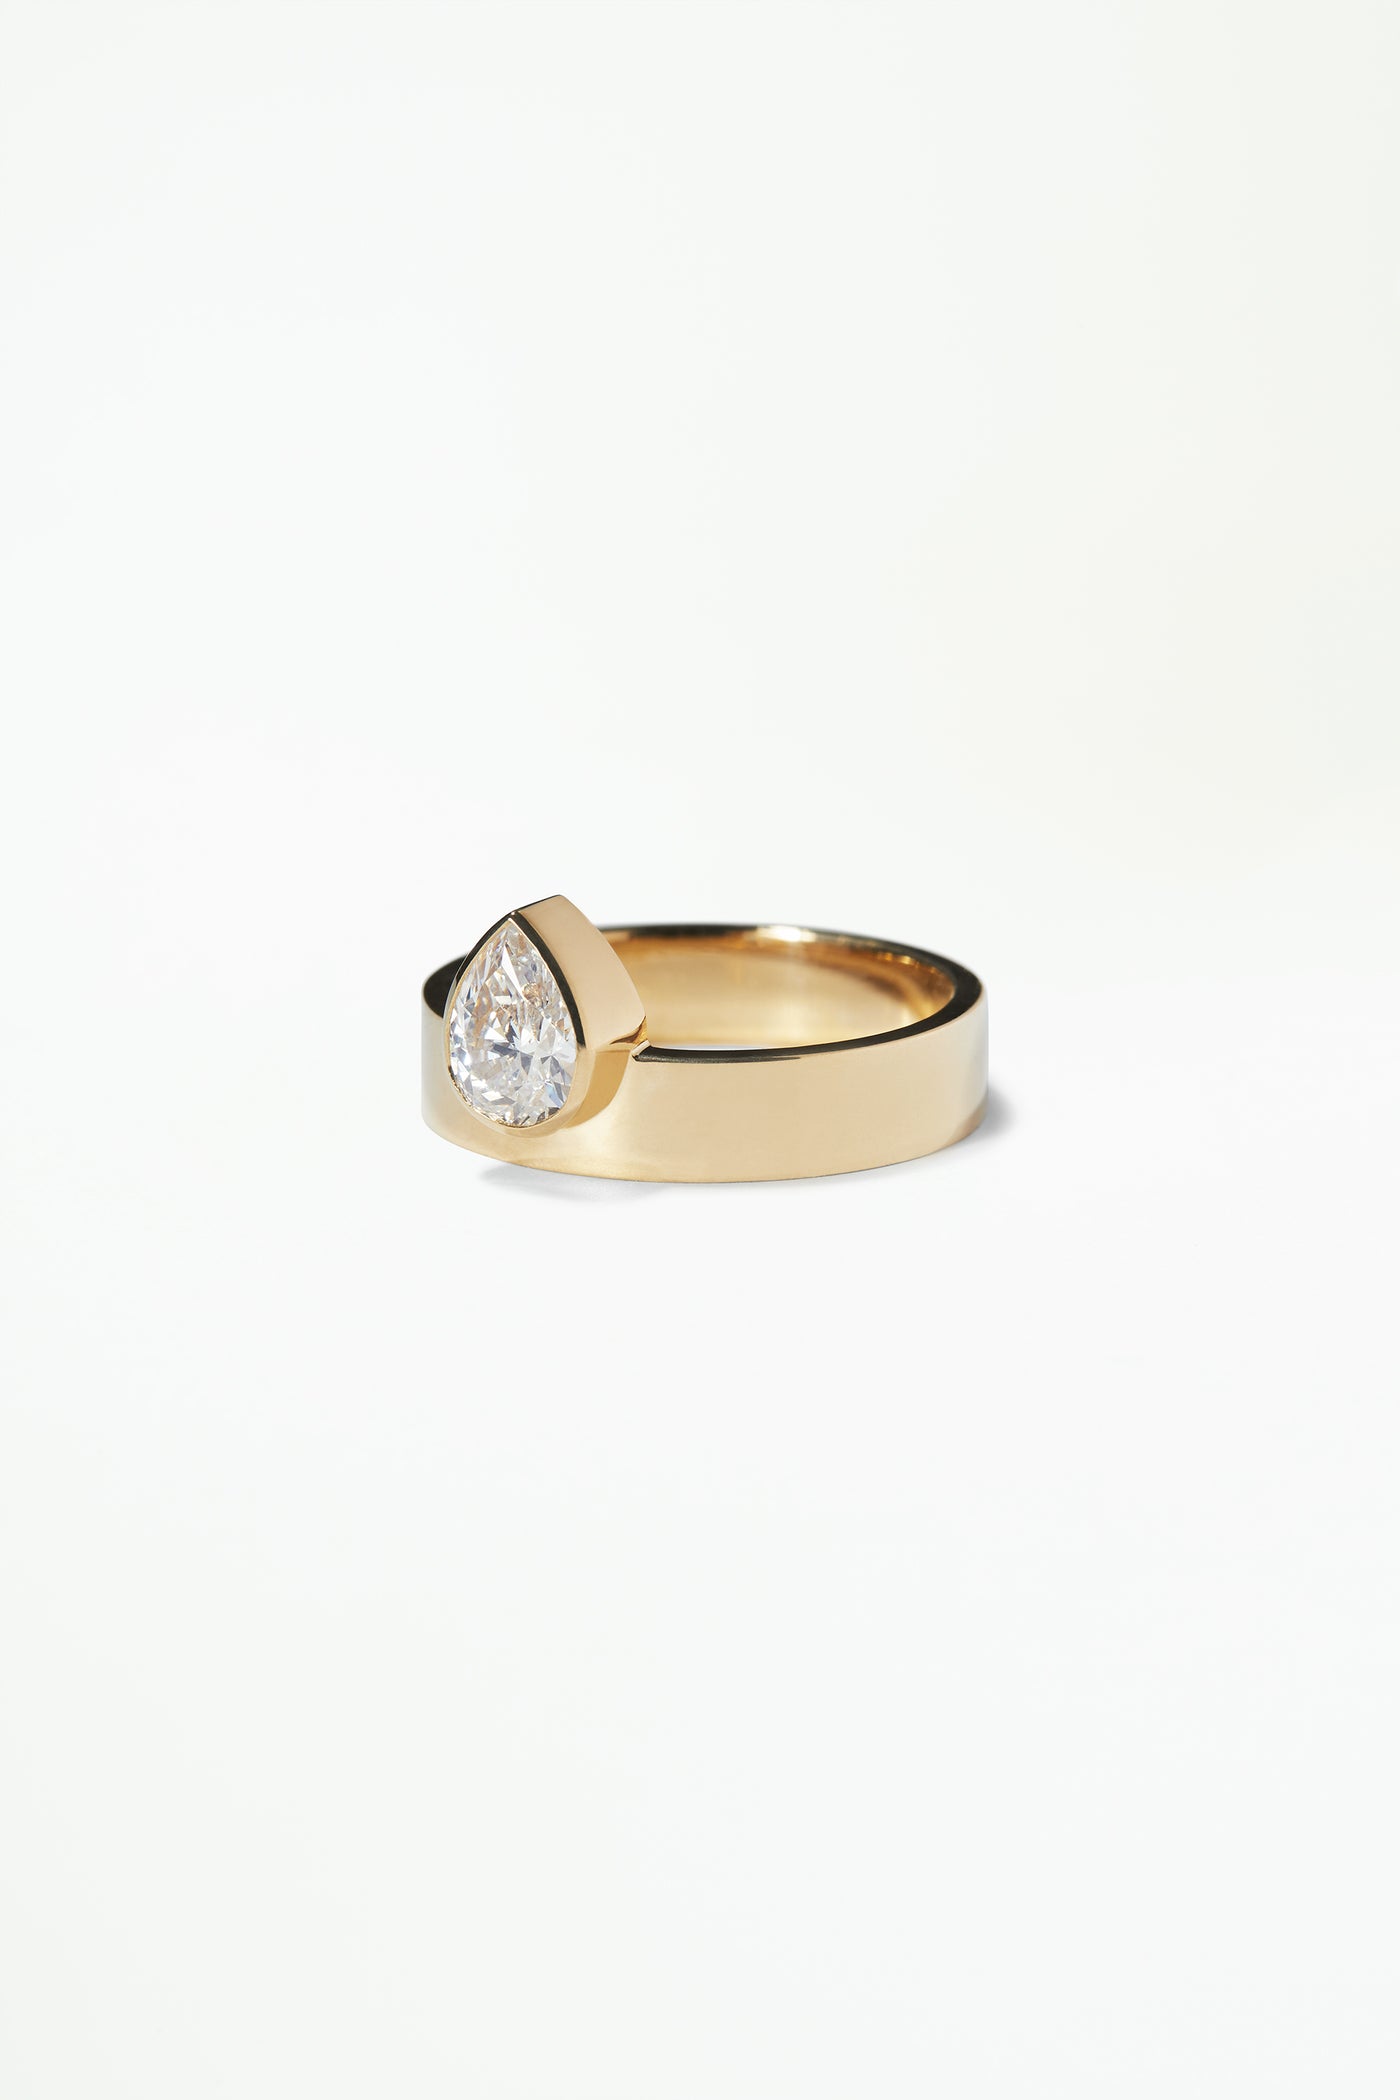 One of a Kind Pear Diamond Monolith Ring